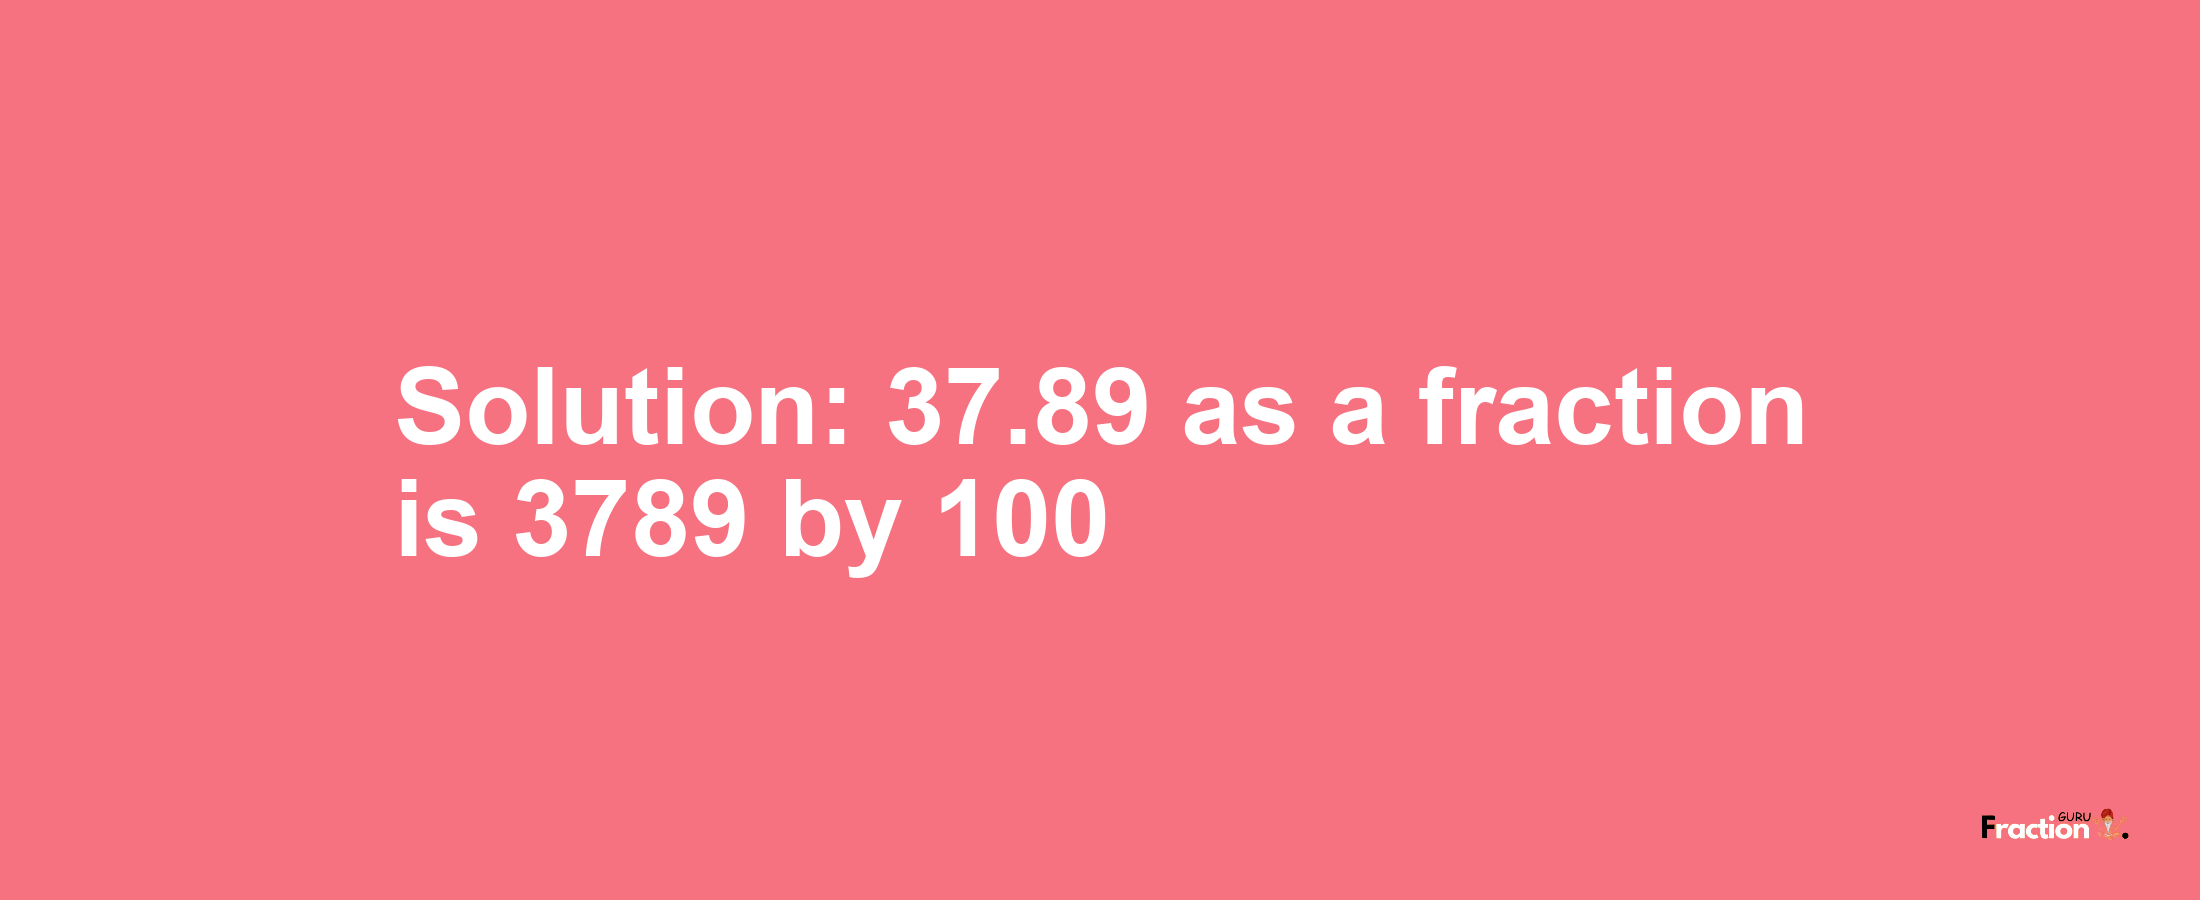 Solution:37.89 as a fraction is 3789/100